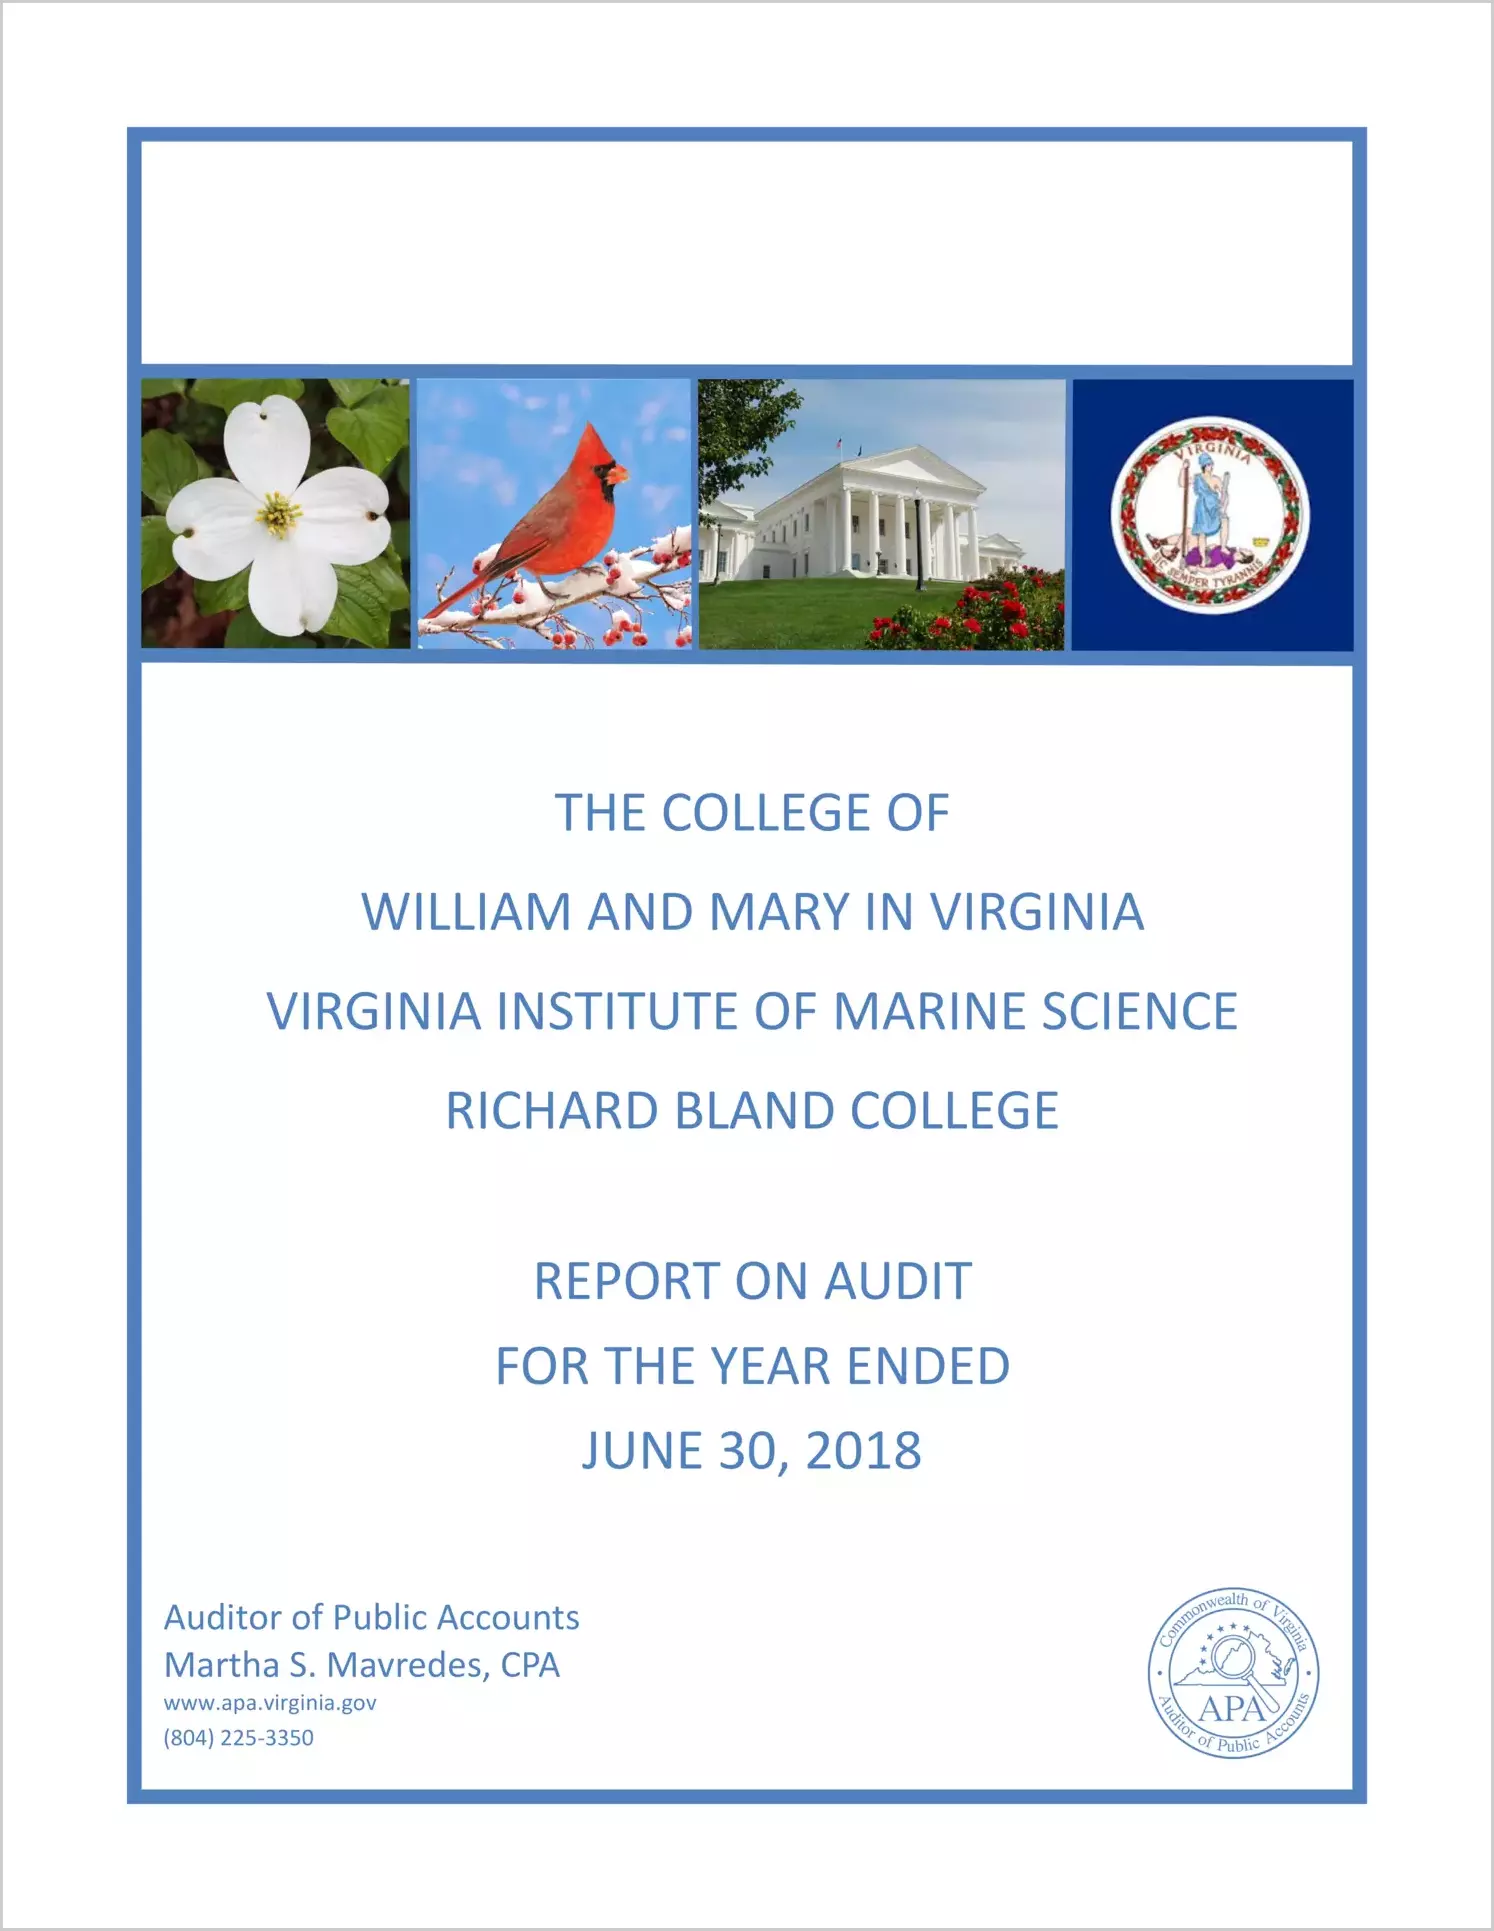 The College of William and Mary in Virginia, Virginia Institute of Marine Science, and Richard Bland College for the year ended June 30, 2018